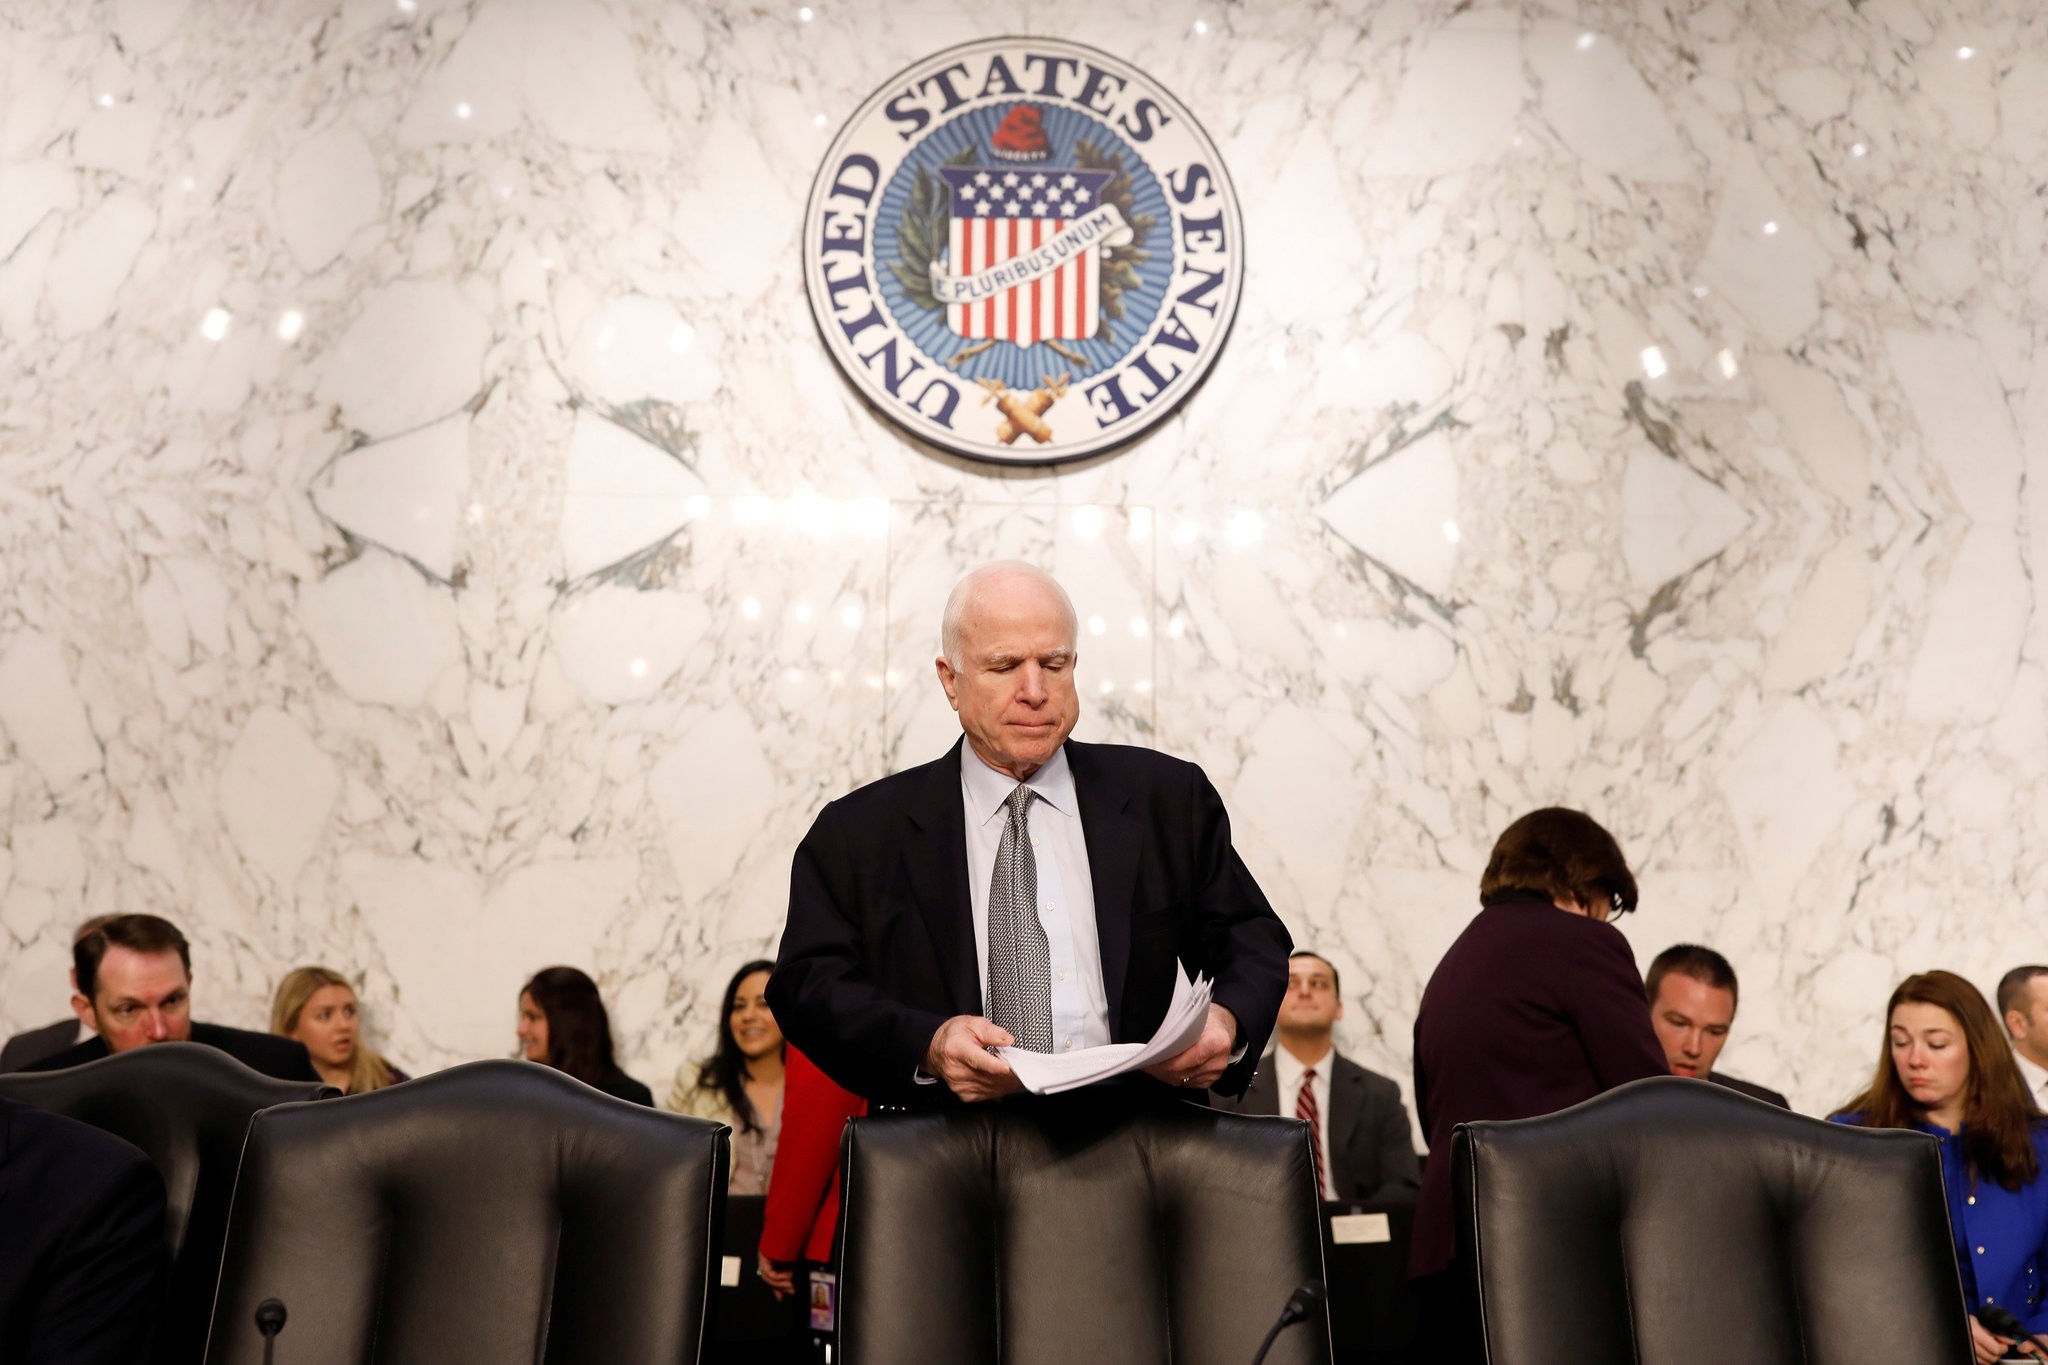 Chairman Sen. John McCain (R-AZ) arrives for a hearing of the Senate Armed Services Committee on Capitol Hill in Washington March 9, 2017. (REUTERS Photo)